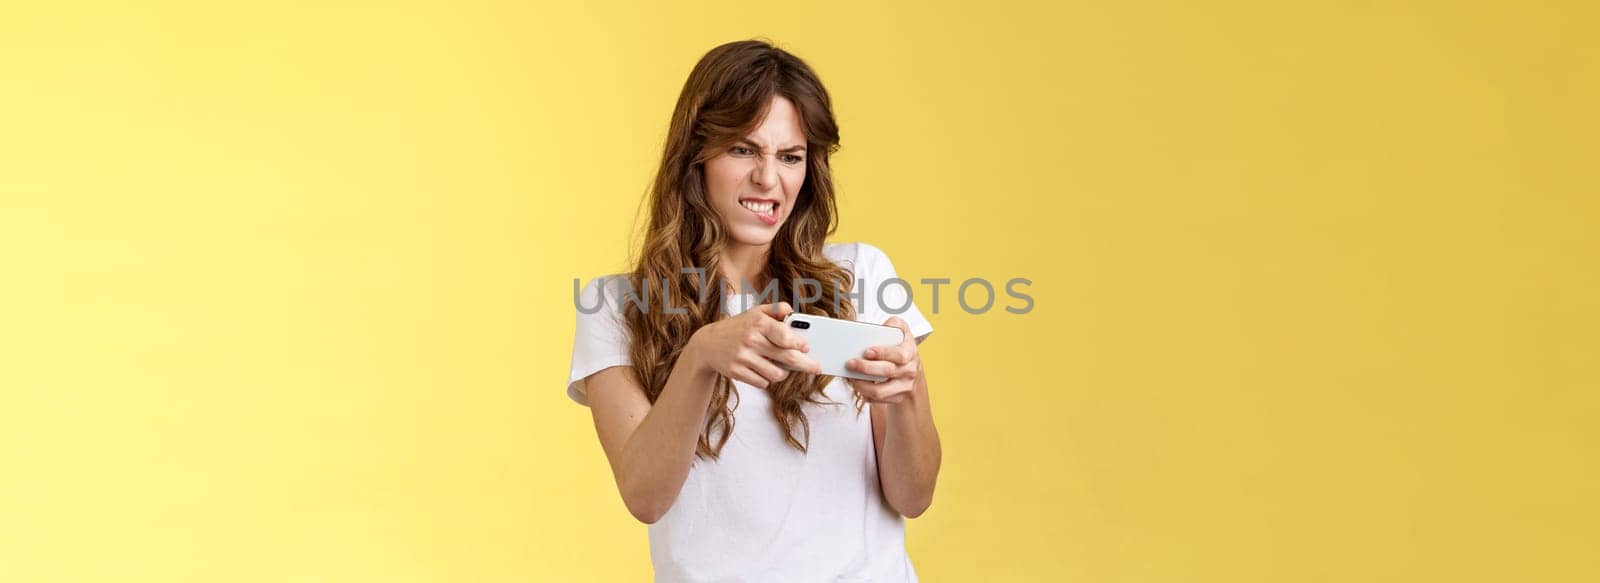 Excited focused playful enthusiastic geeky attractive girl trying beat score hold smartphone horizontal grimacing intense look screen playing awesome arcade game yellow background by Benzoix